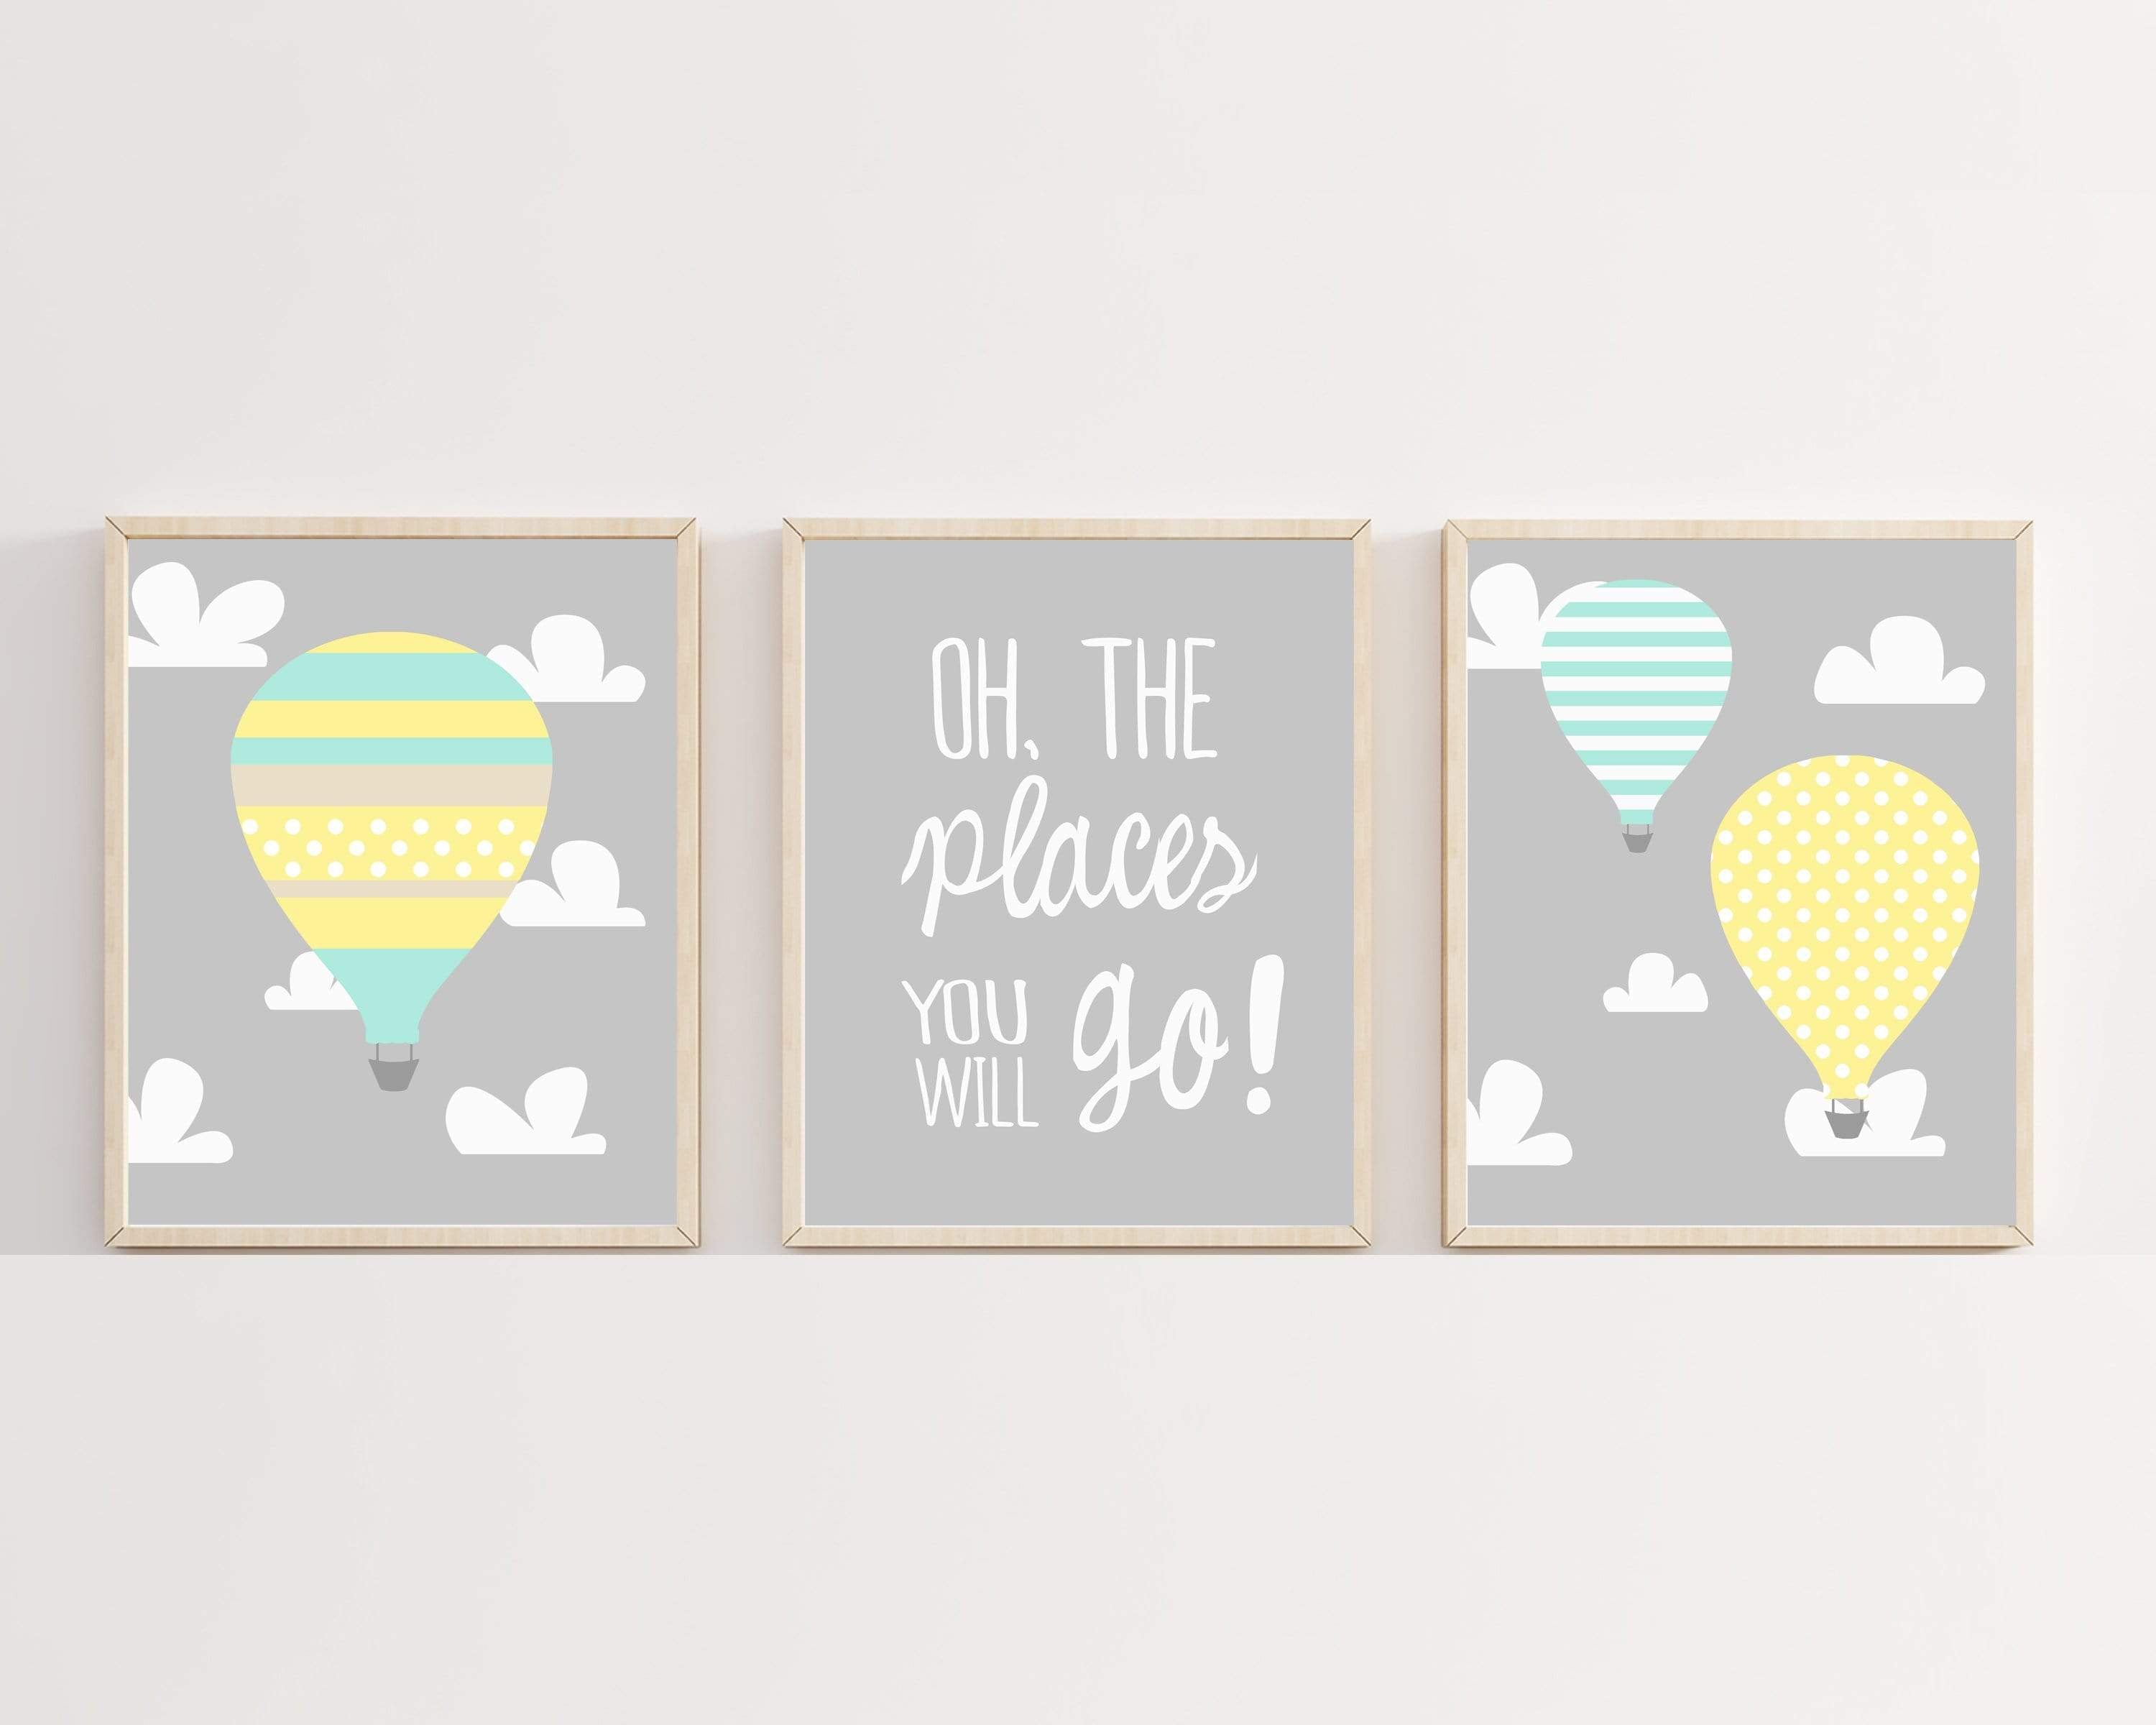 8x10 Baby hot air balloon wall art, Blue Mint, Yellow Nursery decor, Oh the places you will go Baby room art prints, Hot air balloon nursery H585 nursery art print baby nursery bedroom decor